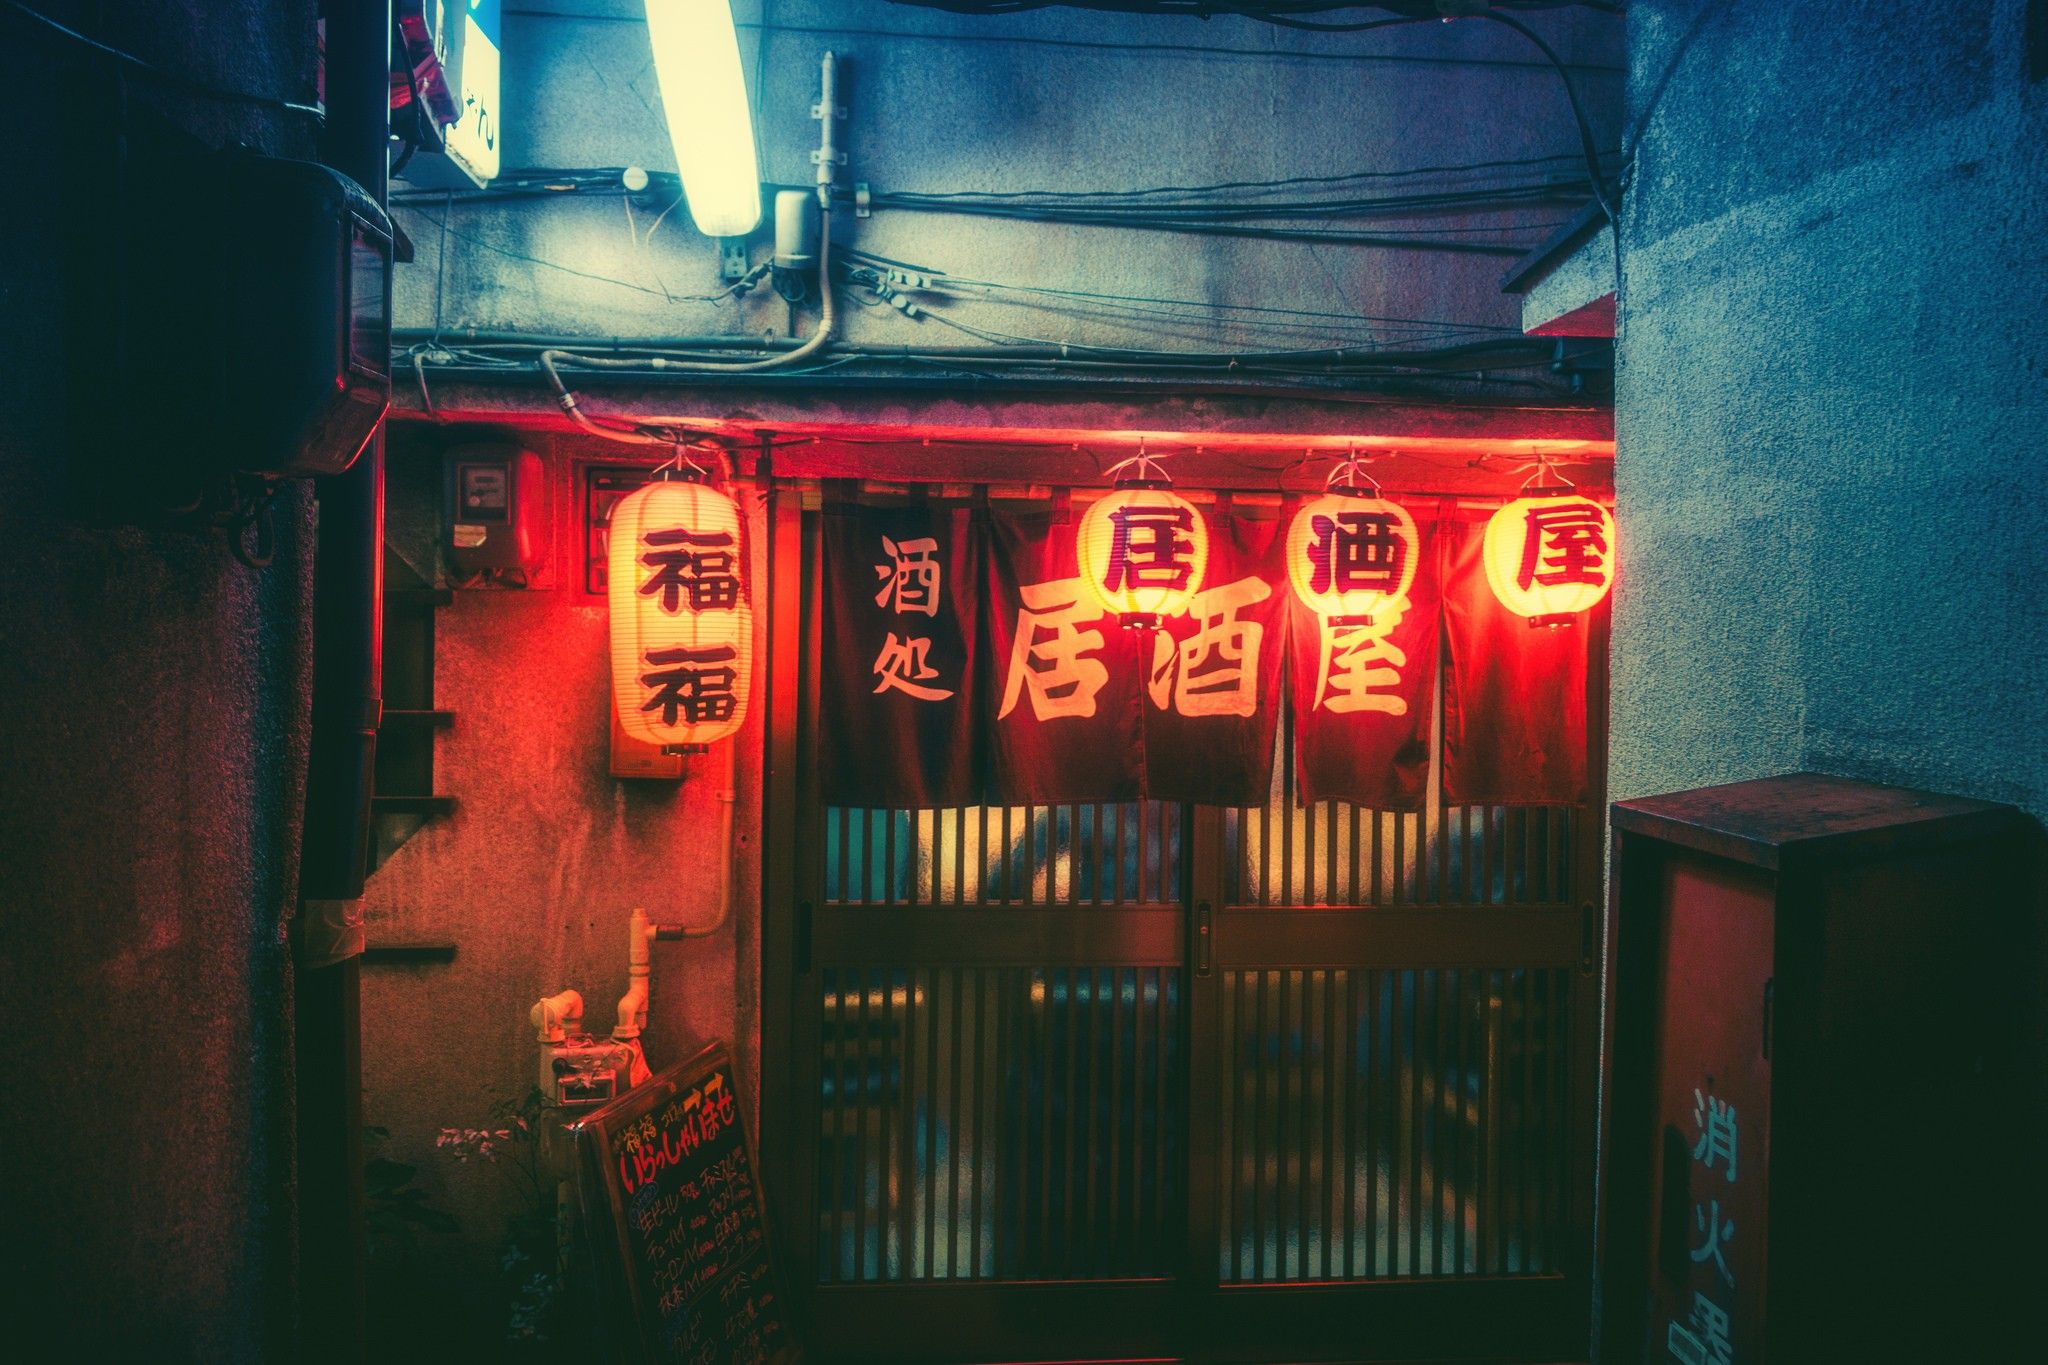 Wallpaper, Japan, city, night, red, town, bar, neon sign, color, darkness, signage 2048x1365